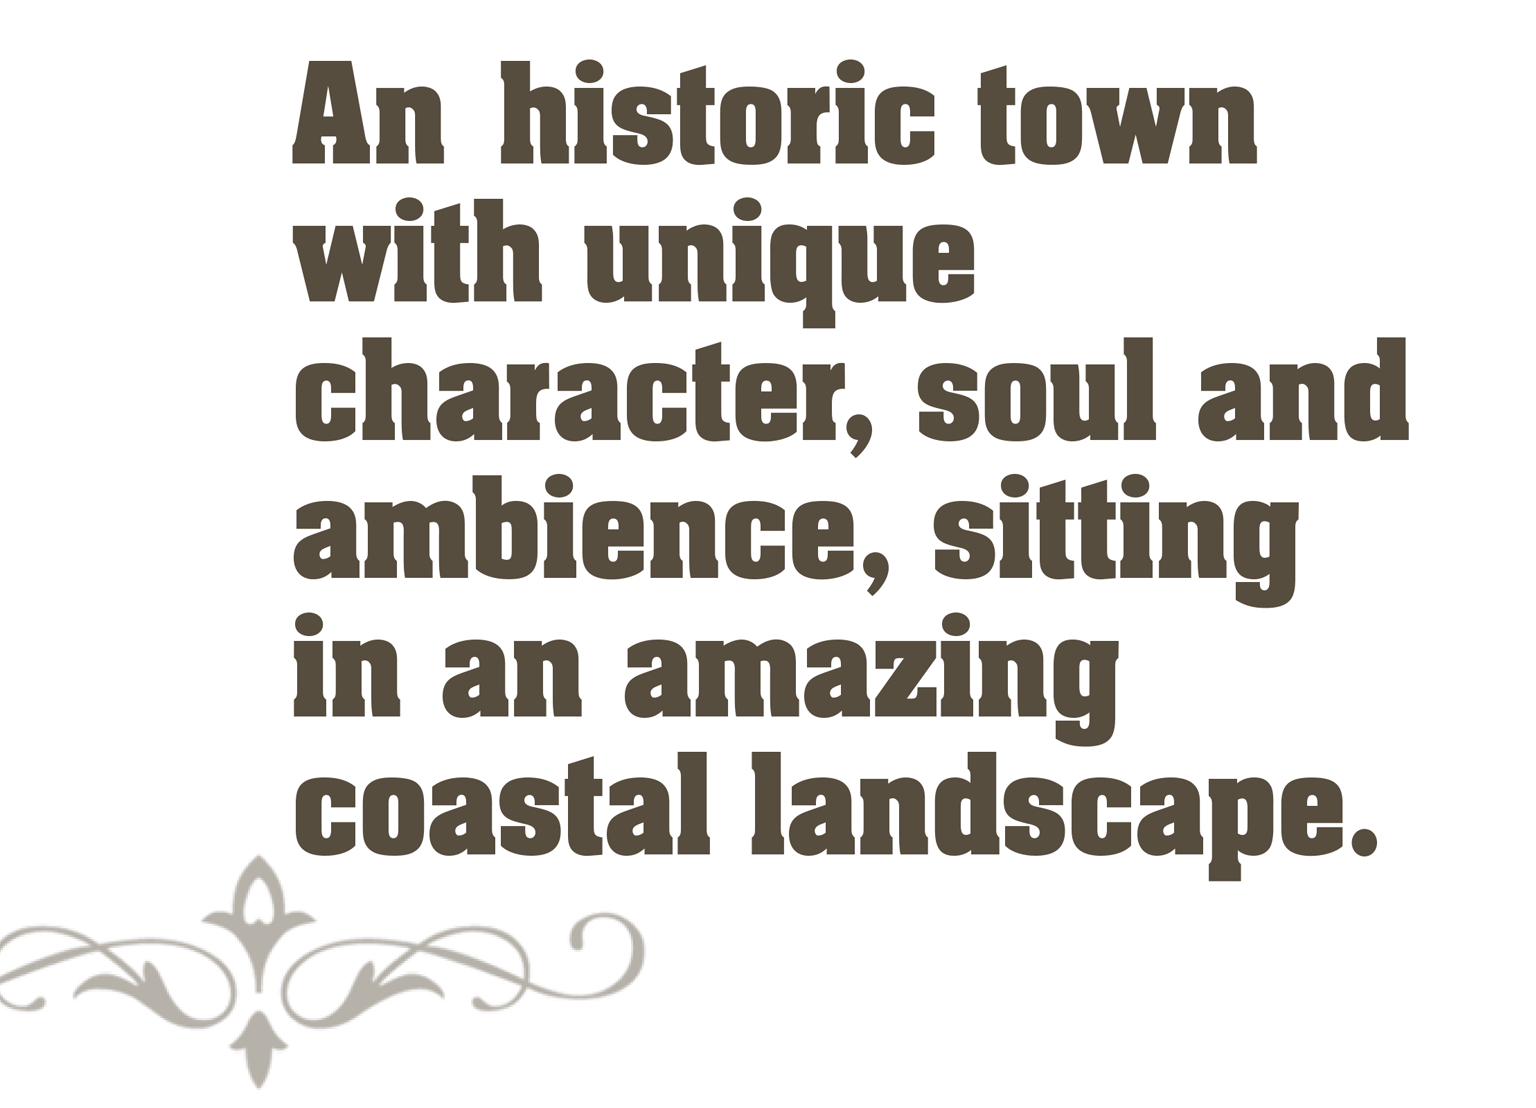 A historic town with unique character, soul and ambience, sitting in an amazing coastal landscape. 